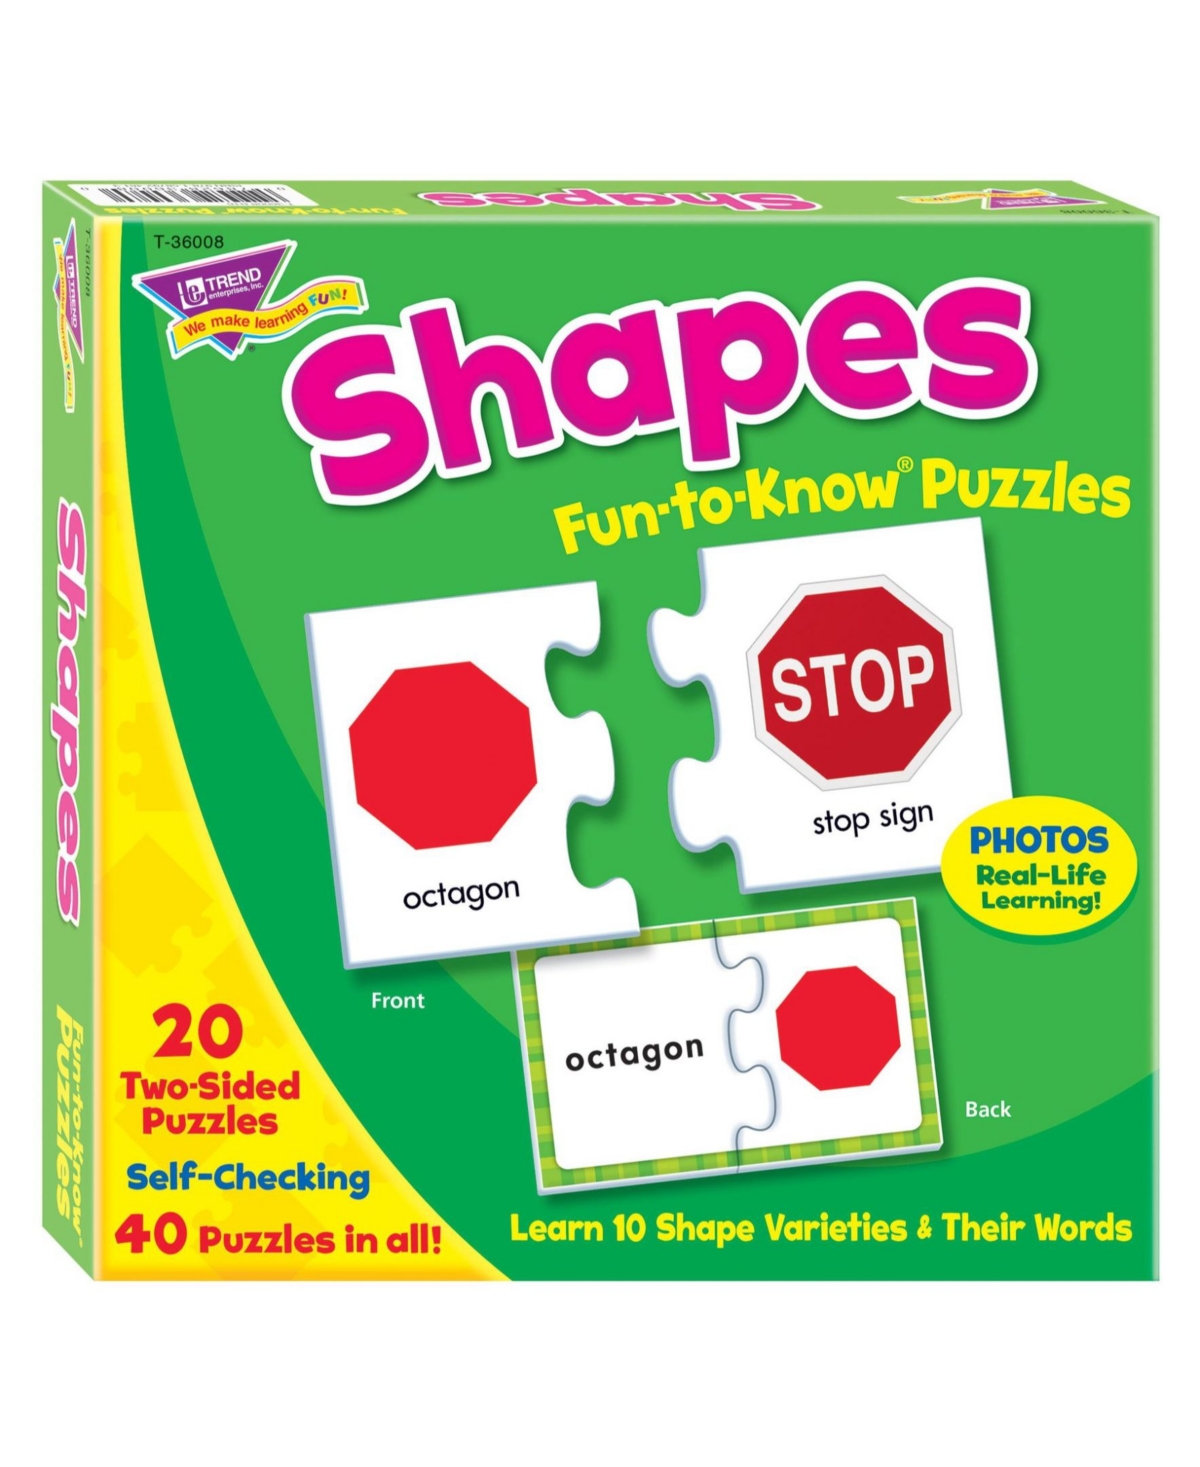 Trend Enterprises Kids' Shapes Fun-to-know Puzzles In Open Misce